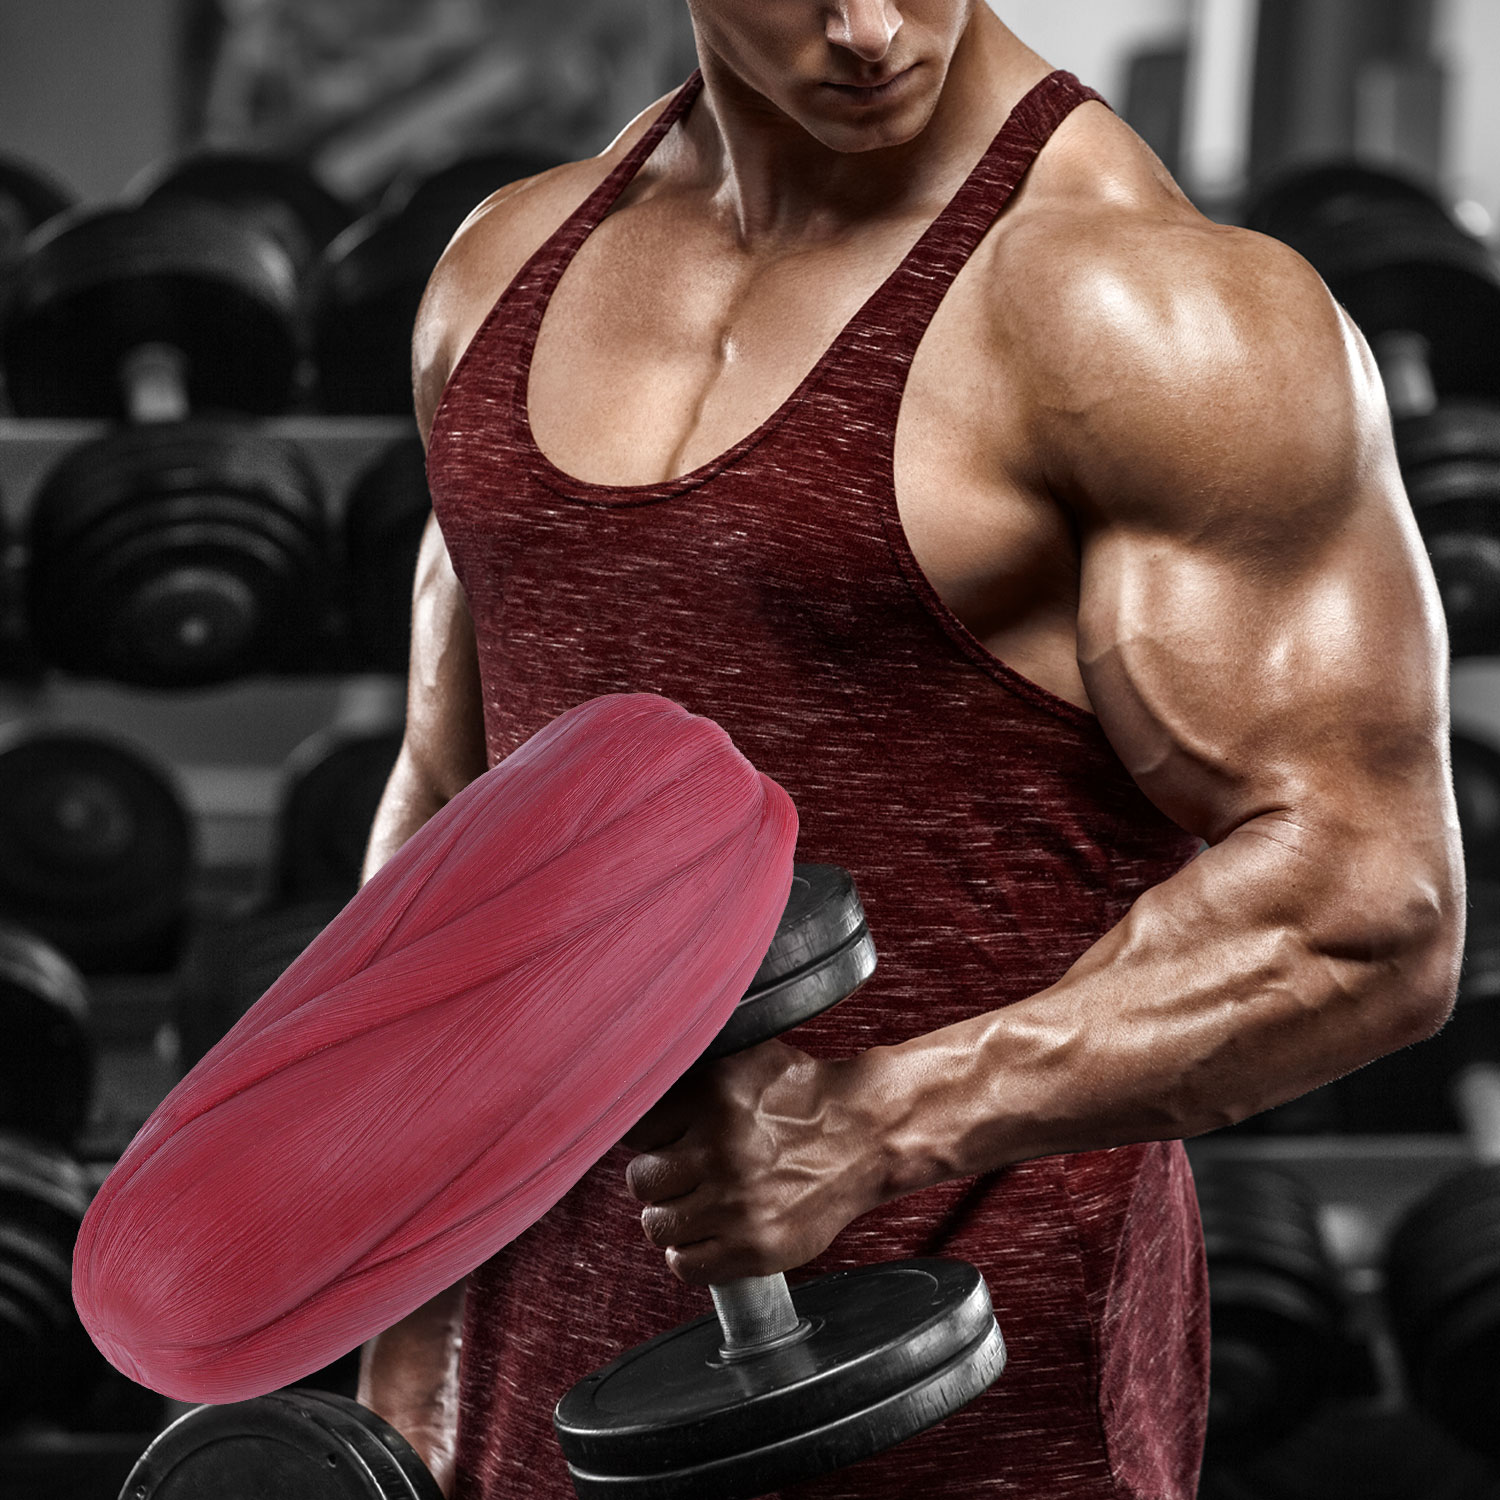 5lb Muscle Replica for Fitness Reminder & Education